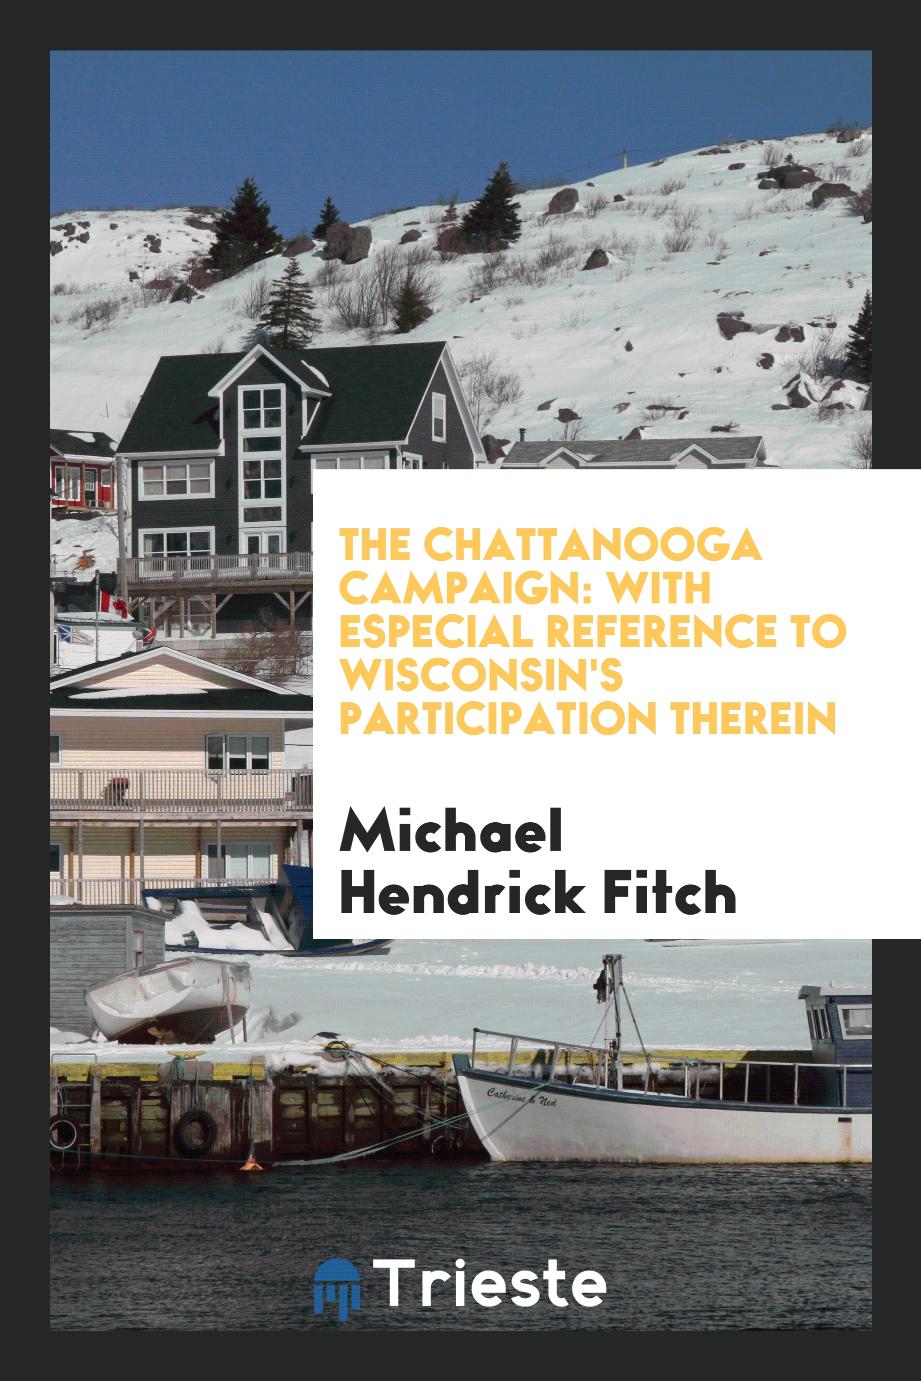 The Chattanooga campaign: with especial reference to Wisconsin's participation therein